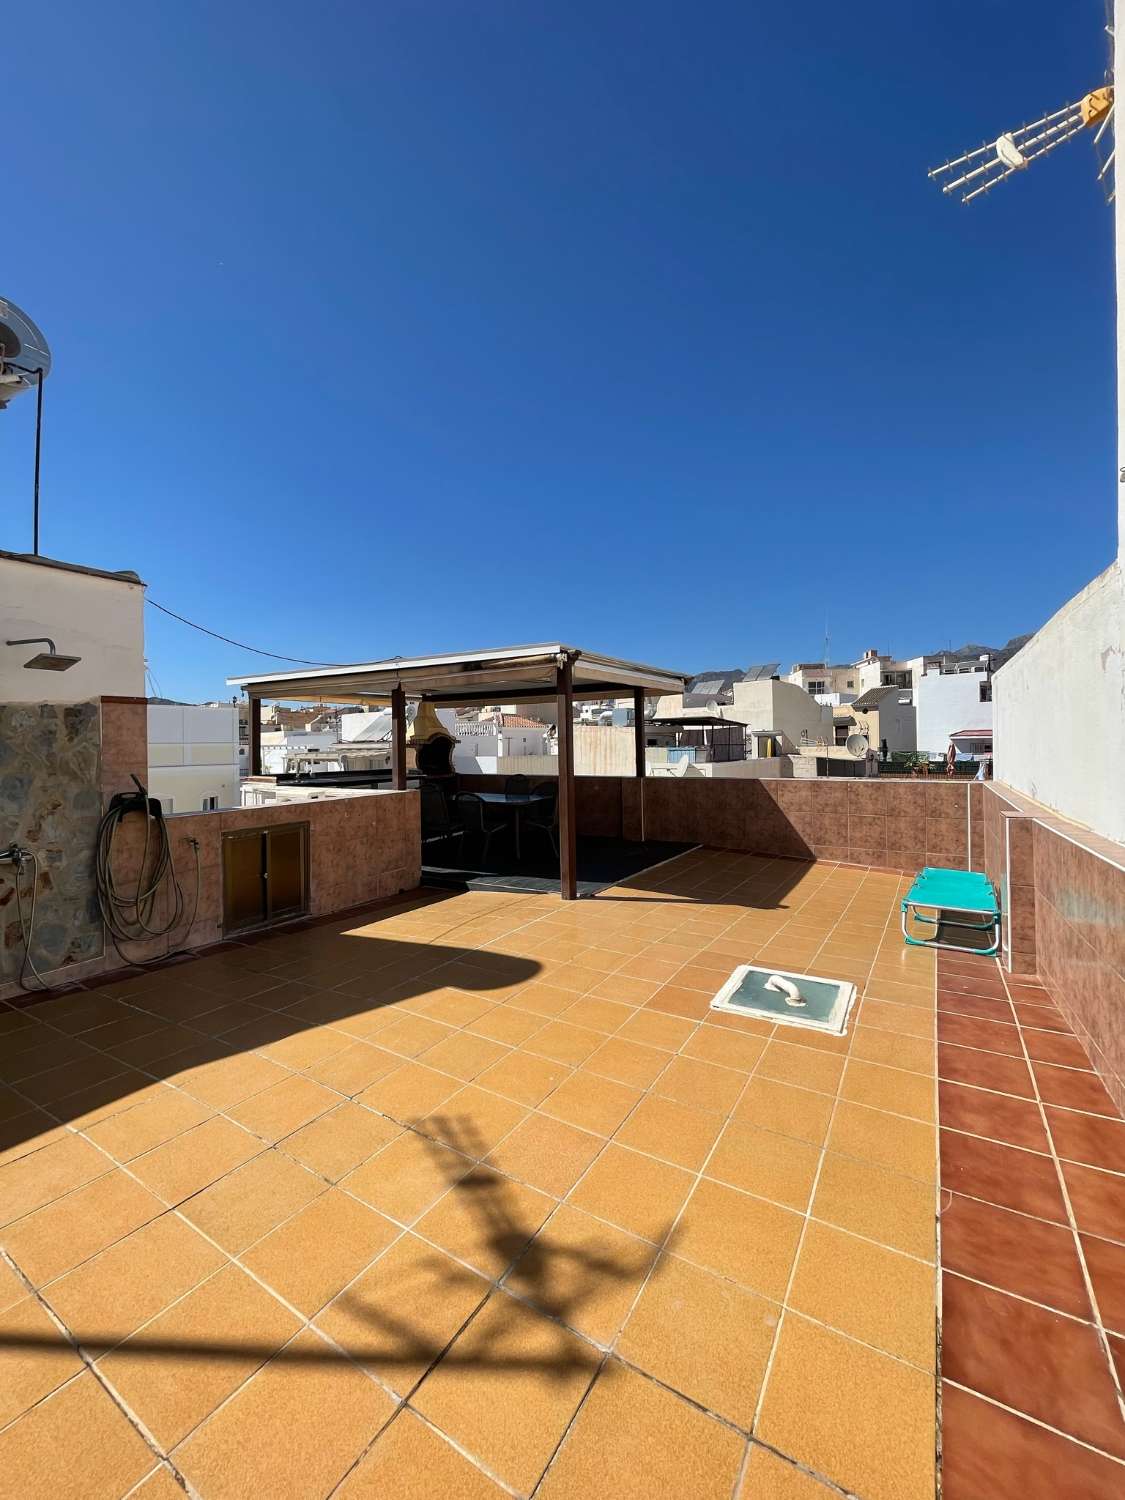 Apartment with private terrace and 4 bedrooms in the center of Nerja